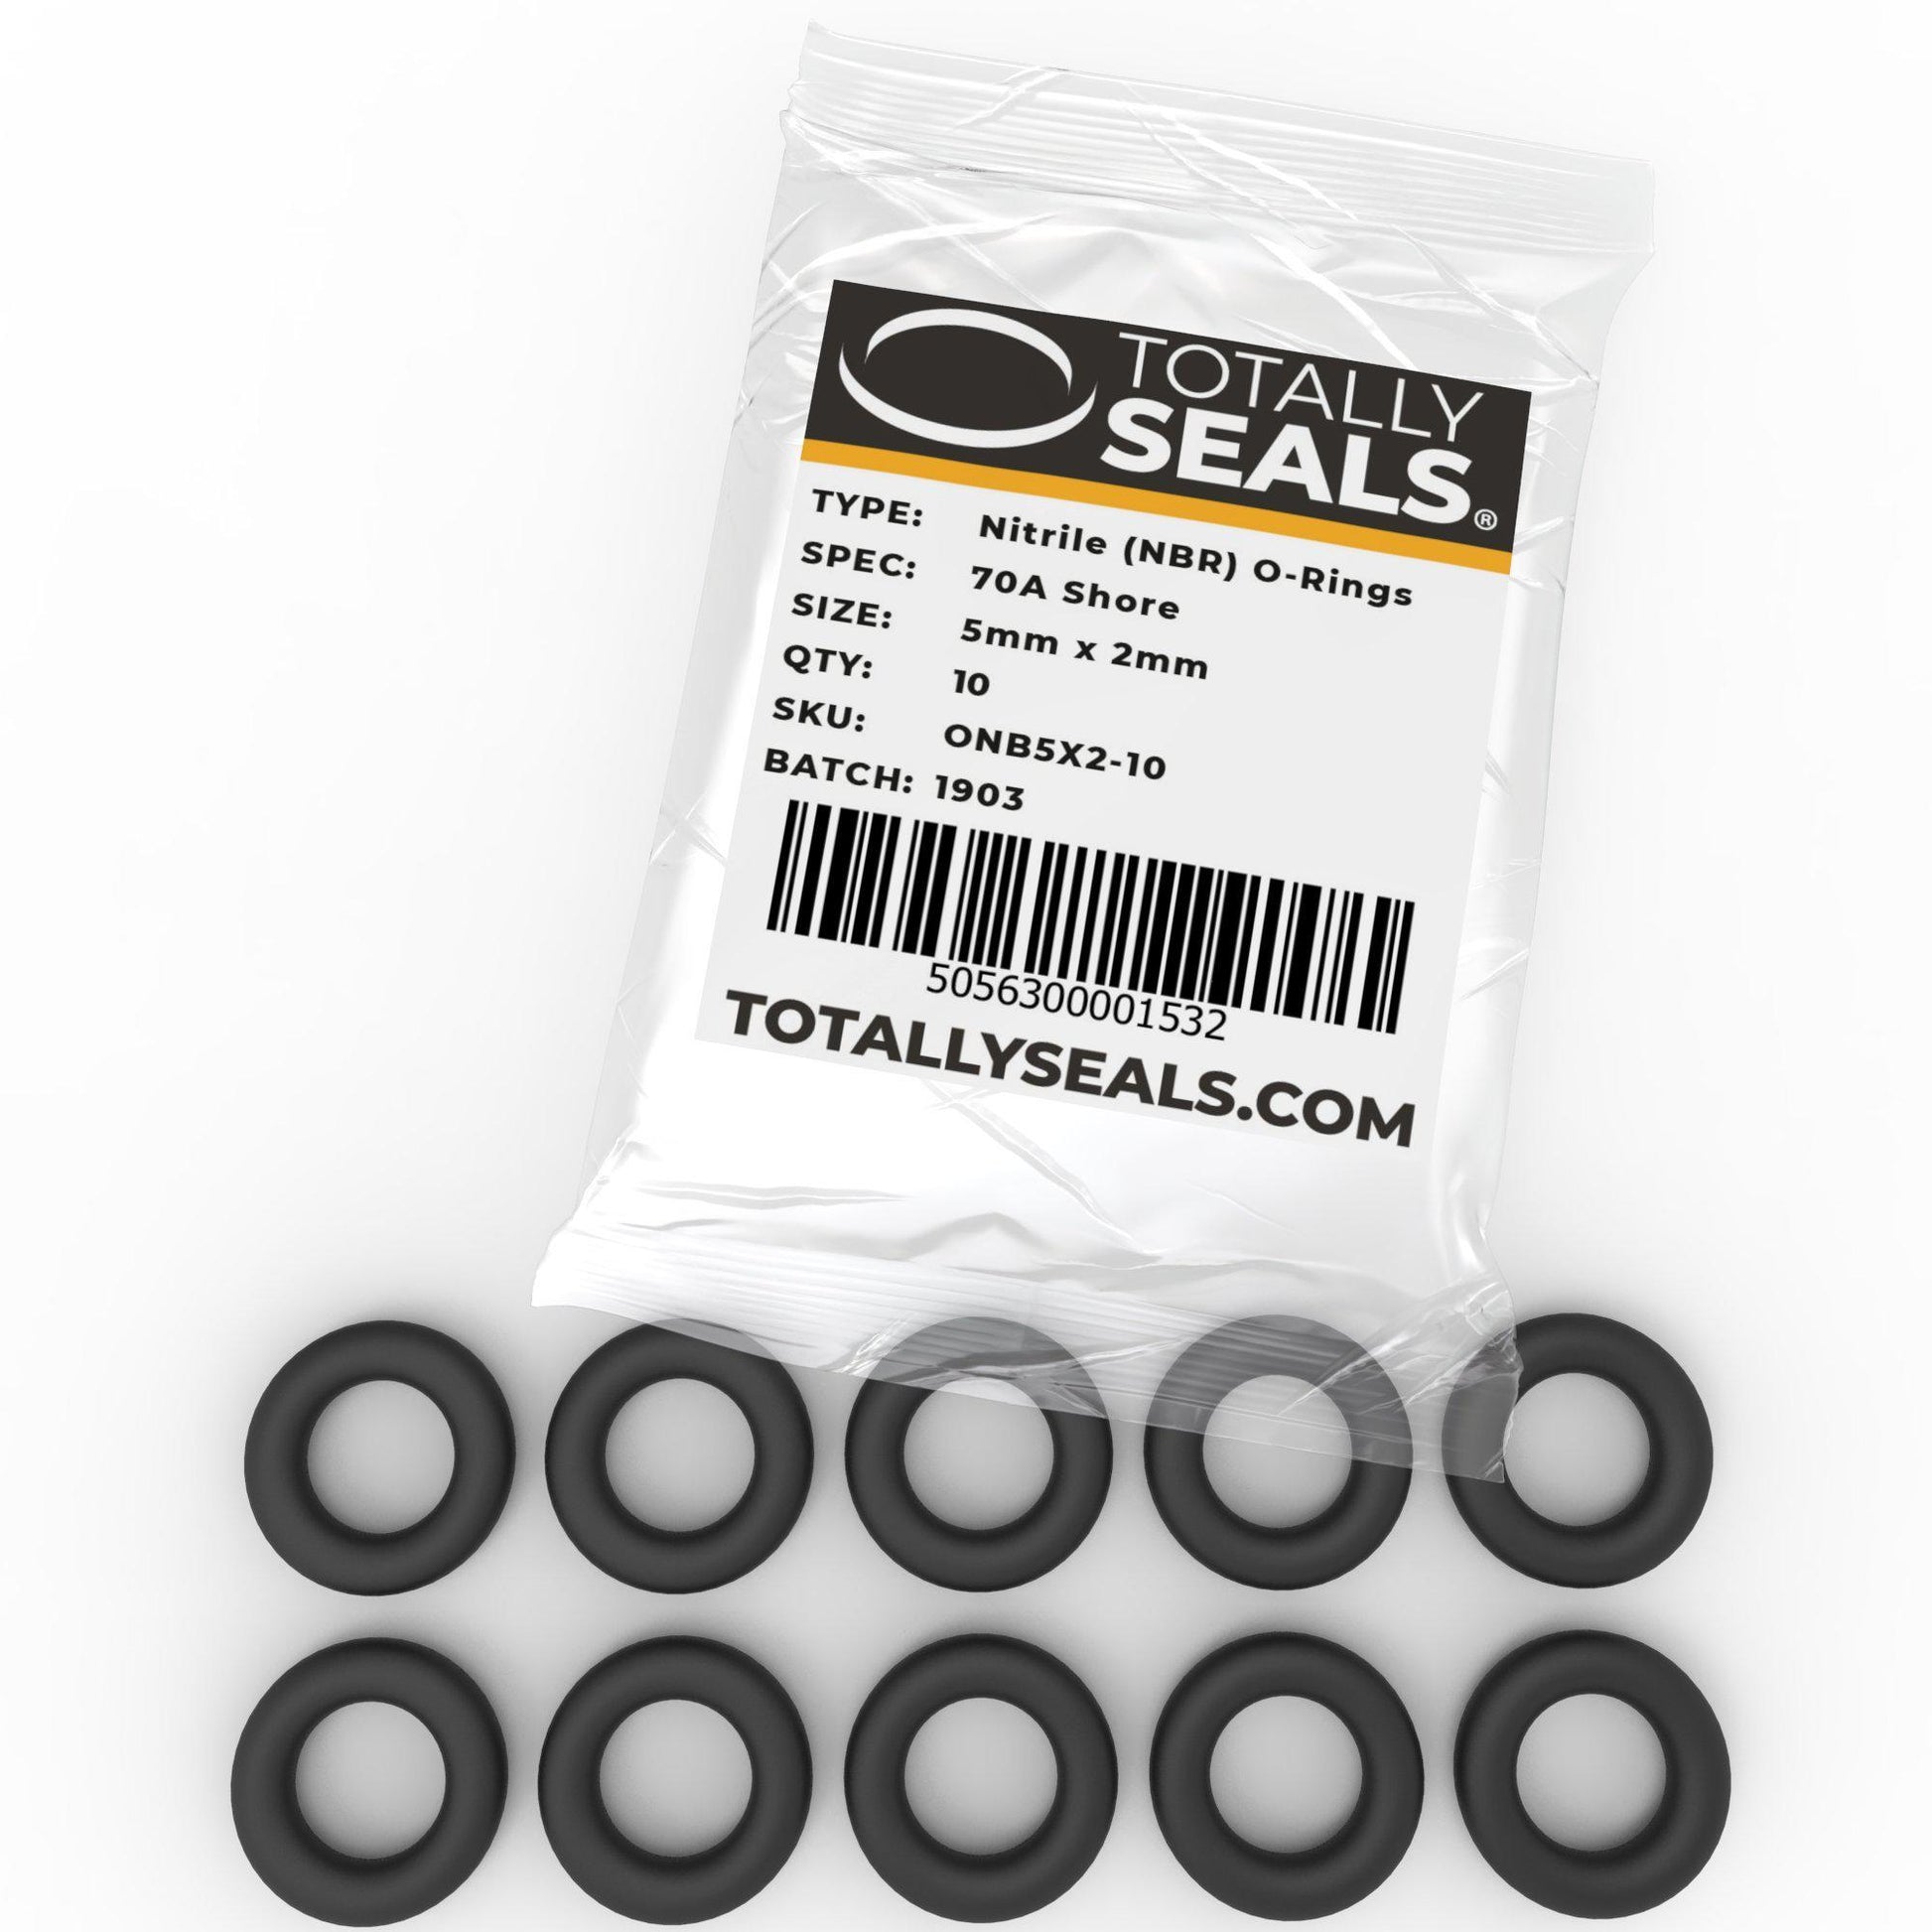 5mm x 2mm (9mm OD) Nitrile O-Rings - Totally Seals®